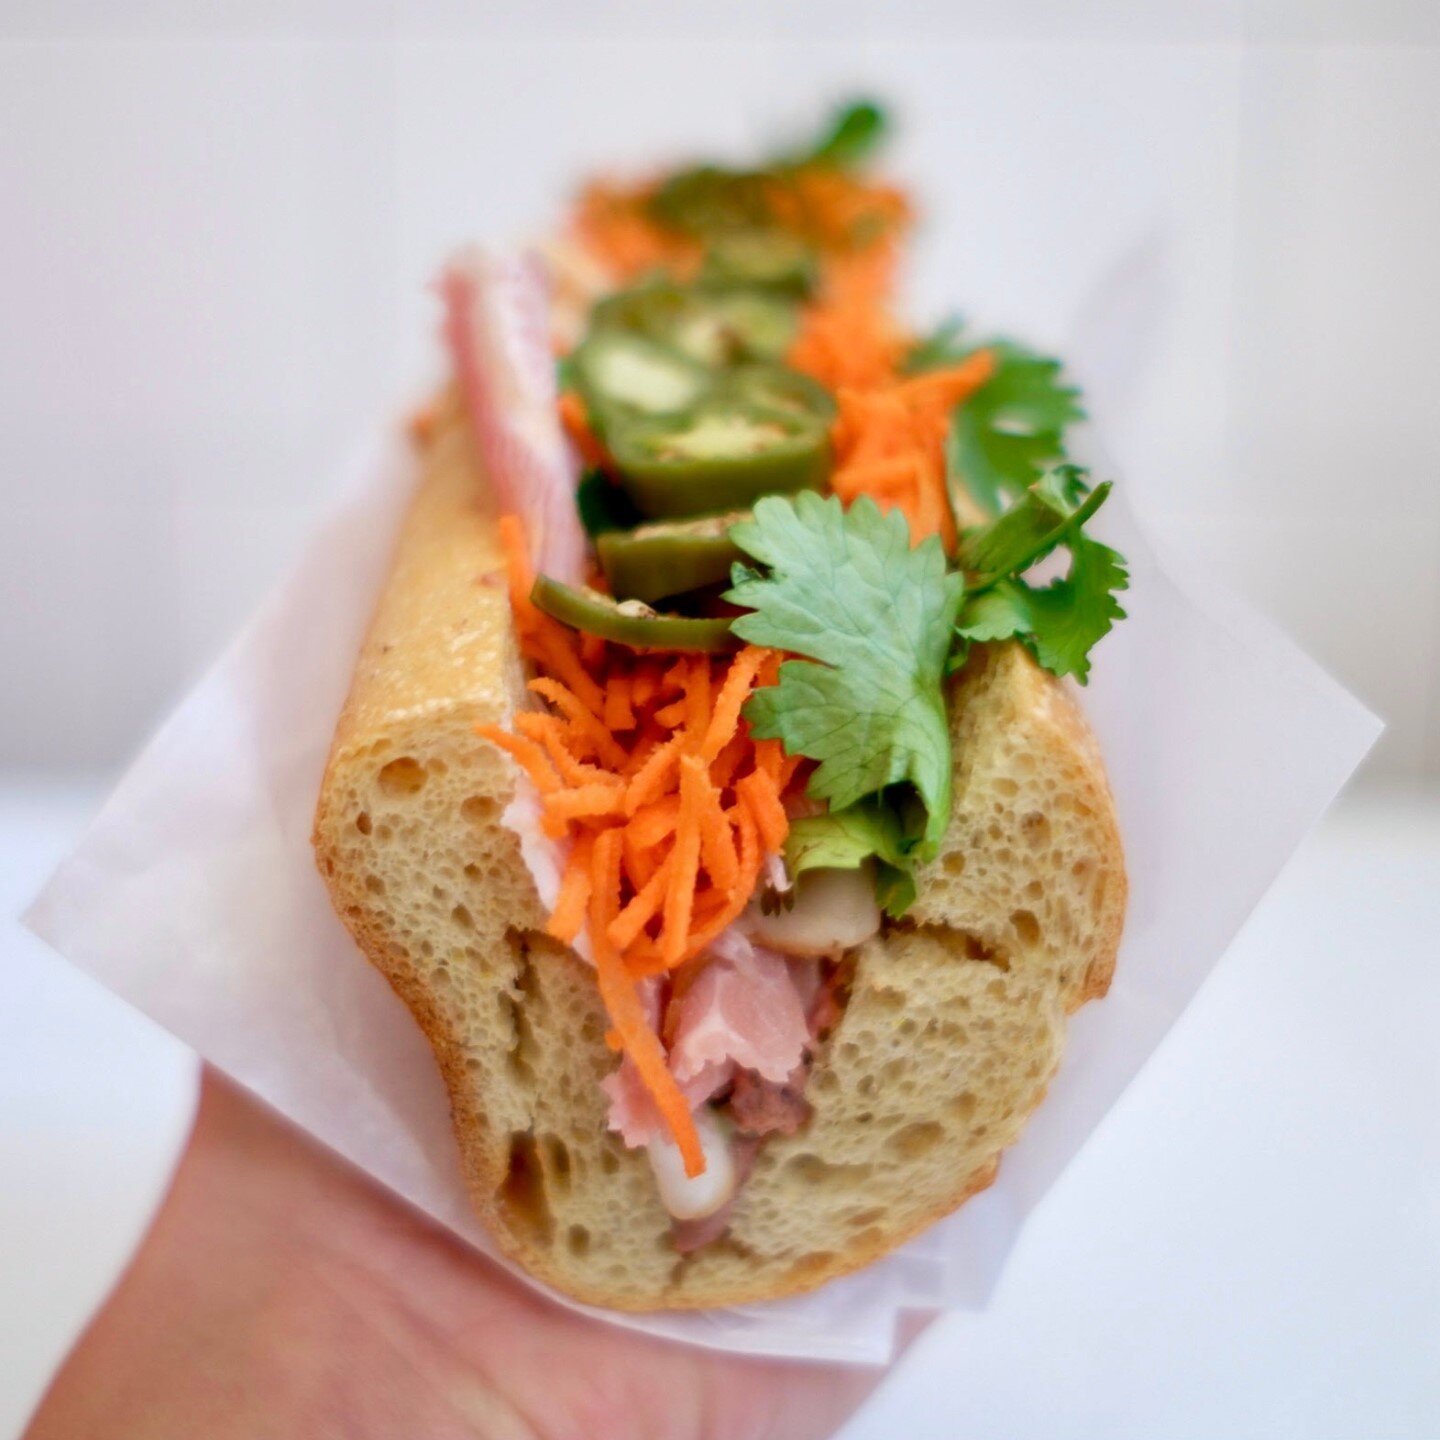 HAM BANH MI⁠ is back this SANDWICH SATURDAY!⁠
⁠
Available in South Philly, Fishtown, and Brewerytown!⁠ Walk-in and take-out sandwiches on Saturday from 10am until they're gone.⁠
⁠
HAM BANH MI⁠
House-Smoked Ham⁠
Chicken Liver Pate⁠
Pickled Jalepeño⁠
